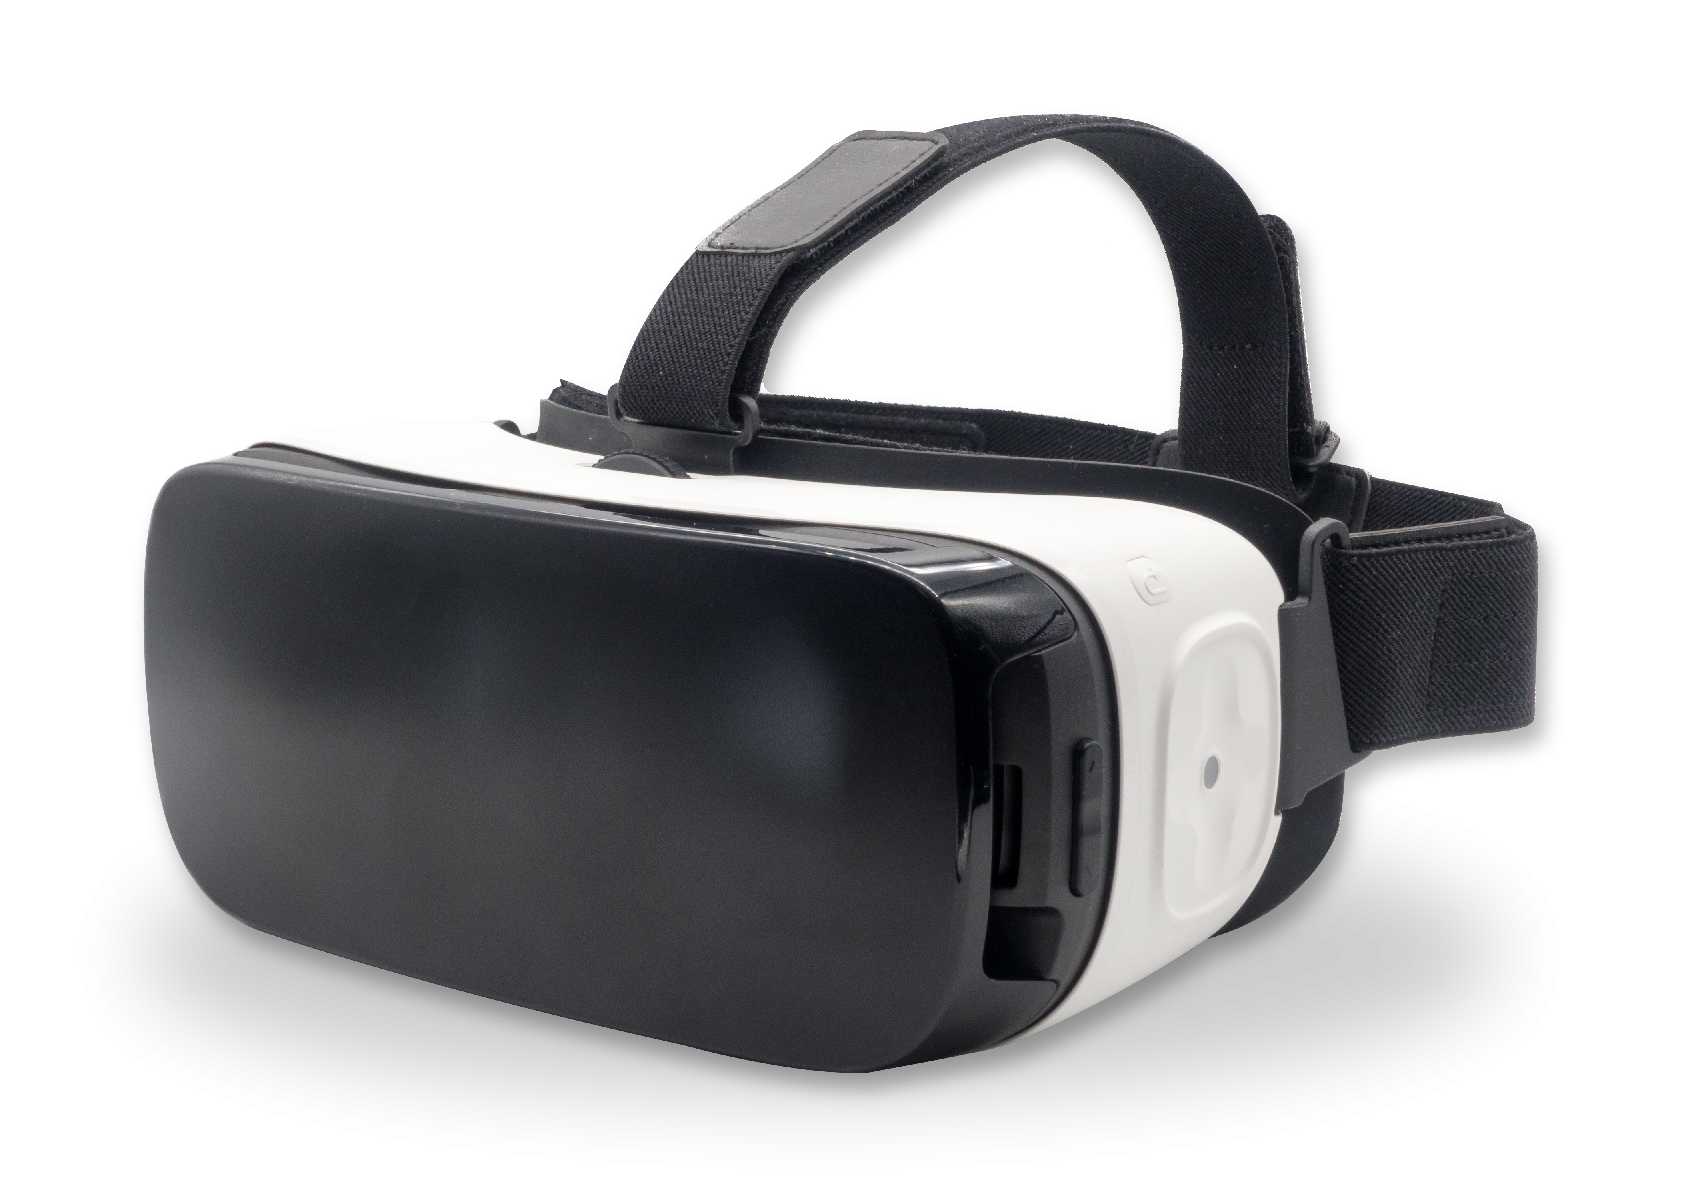 Norm virtual reality goggles